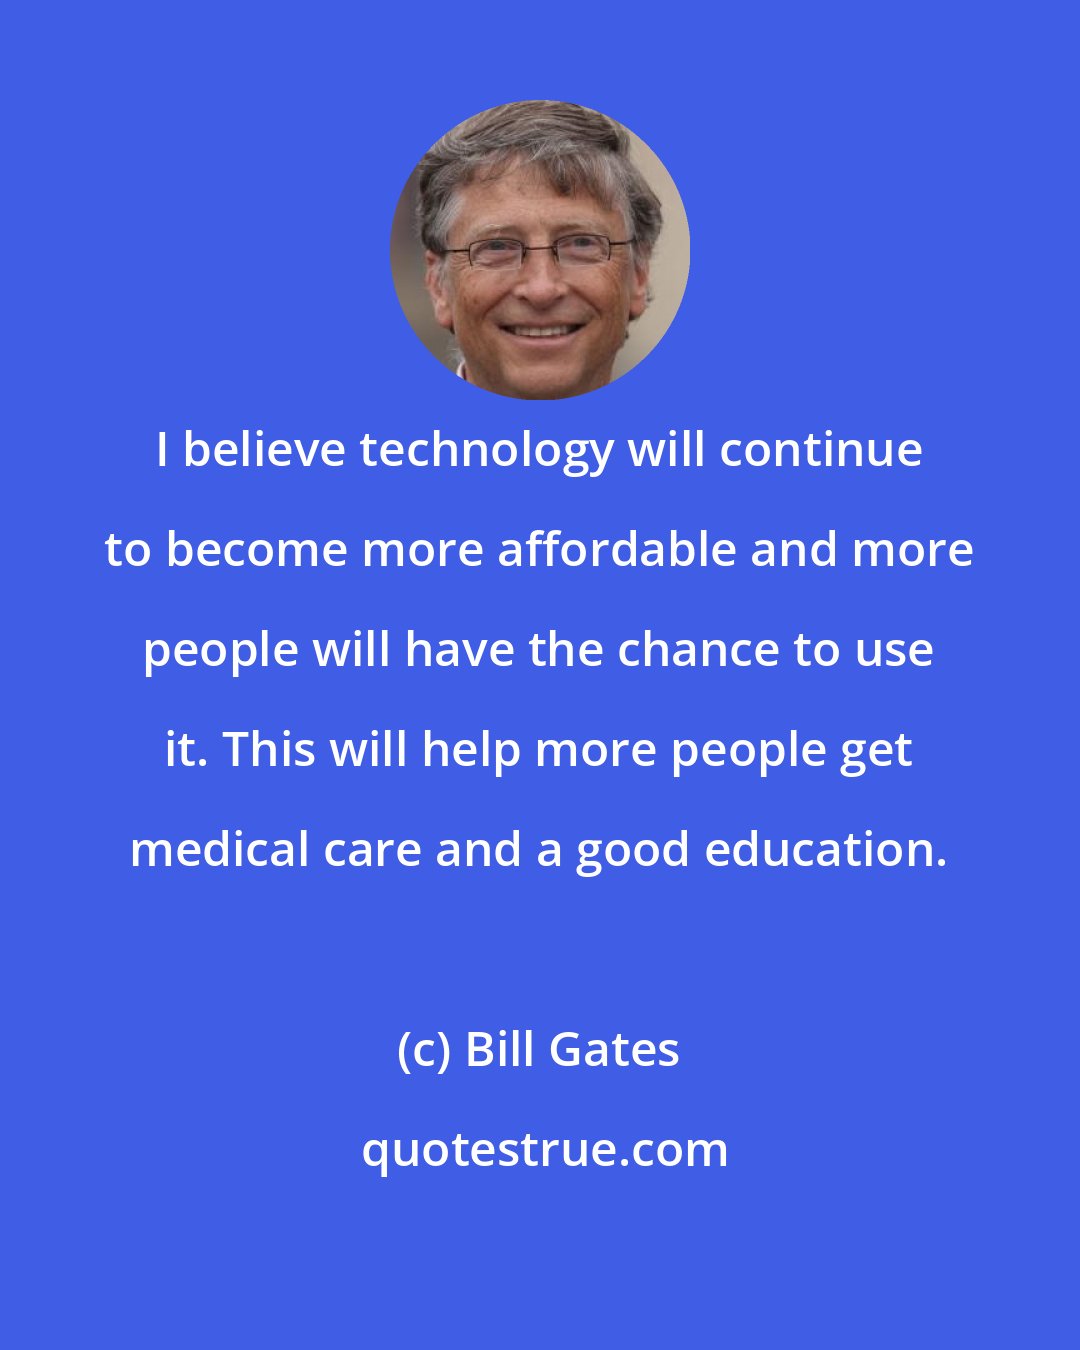 Bill Gates: I believe technology will continue to become more affordable and more people will have the chance to use it. This will help more people get medical care and a good education.